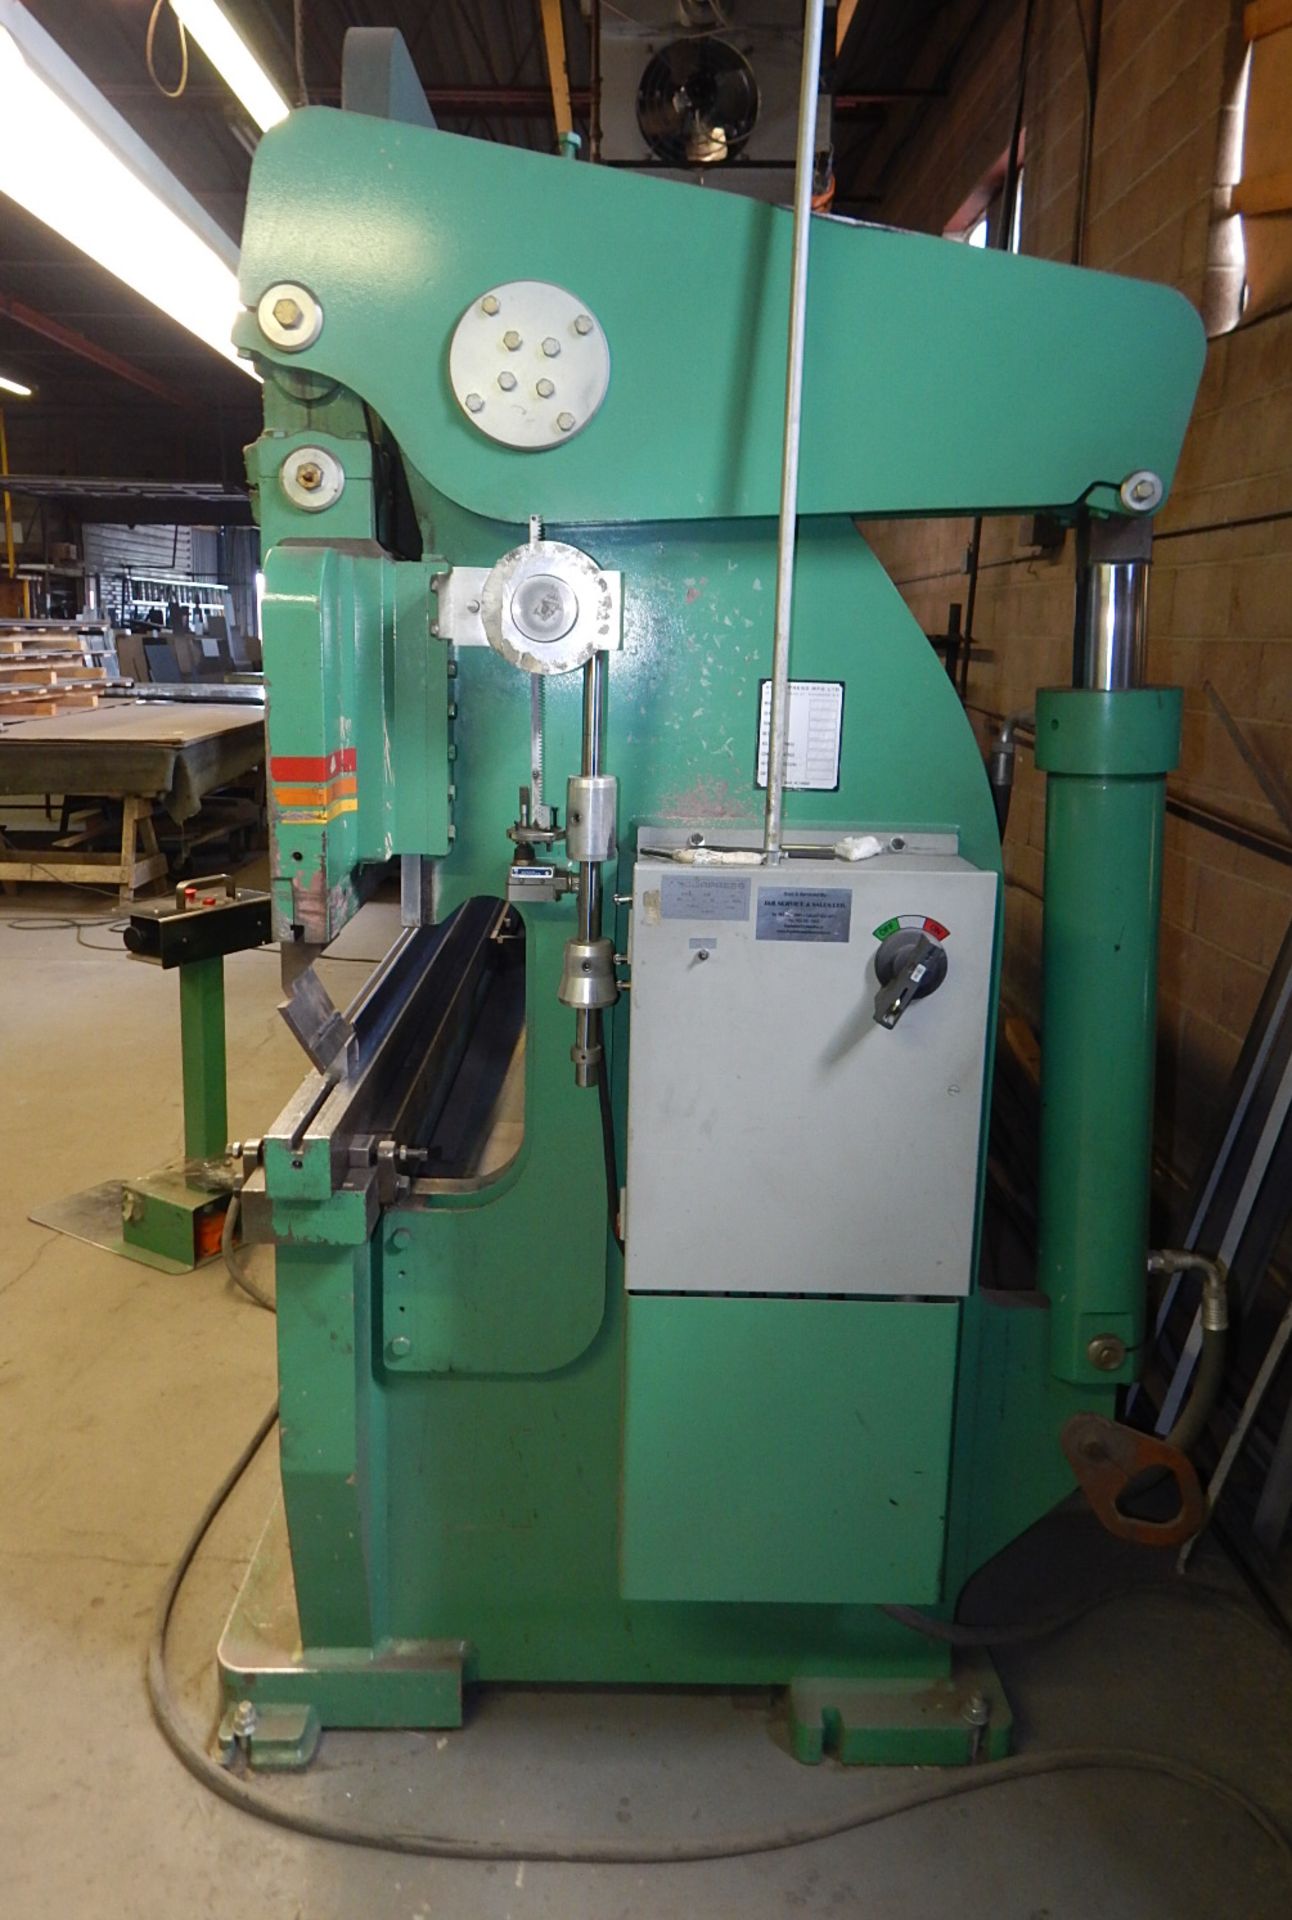 ACCURPRESS 713014 14' HYDRAULIC 130 TON BRAKE PRESS WITH BACK GAUGE 3/16" TO 1" GA. CAPACITY S/N: - Image 8 of 9